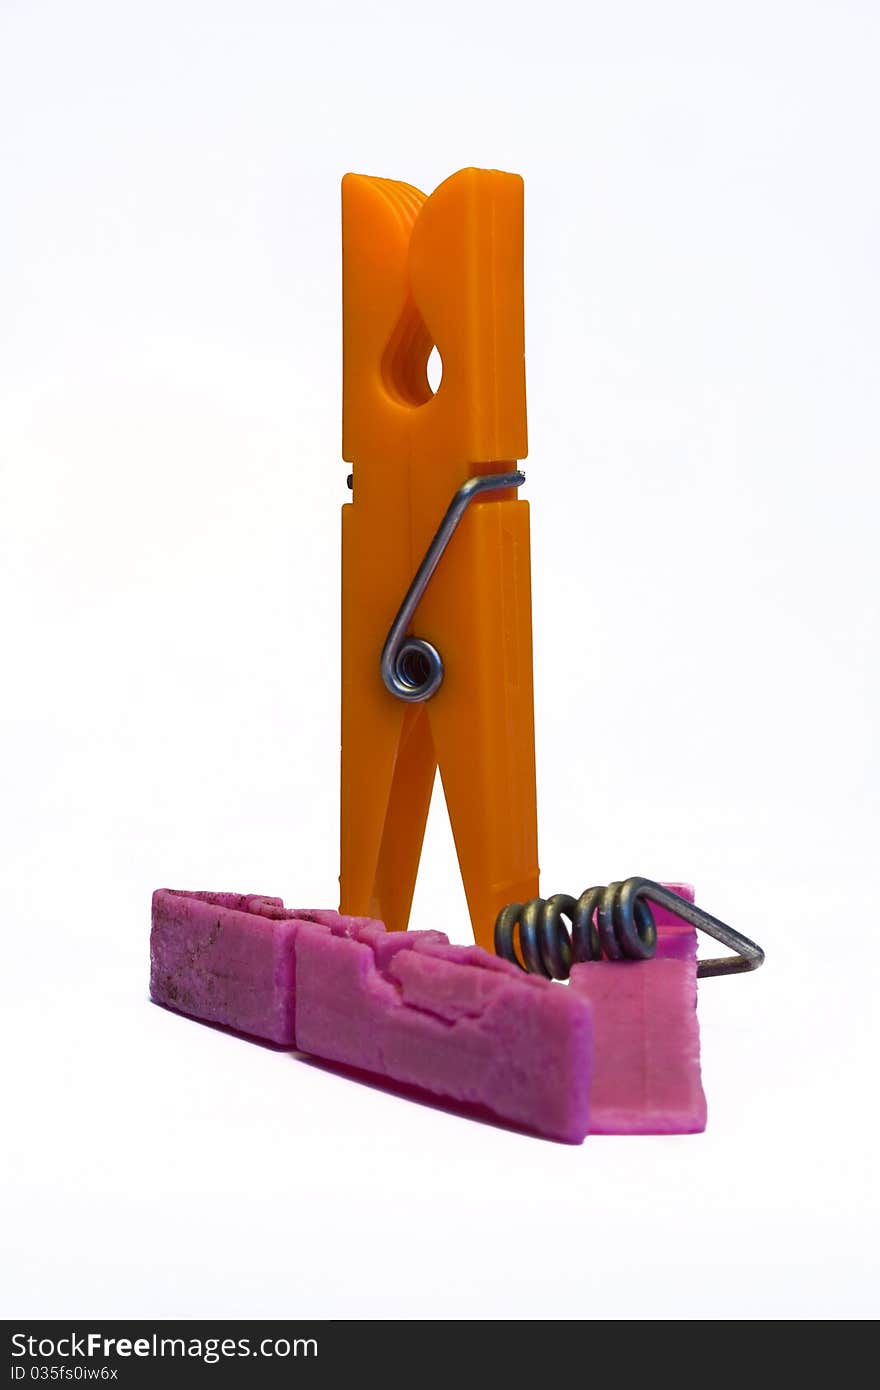 One broken clothespin and one orange clothespin isolated. One broken clothespin and one orange clothespin isolated